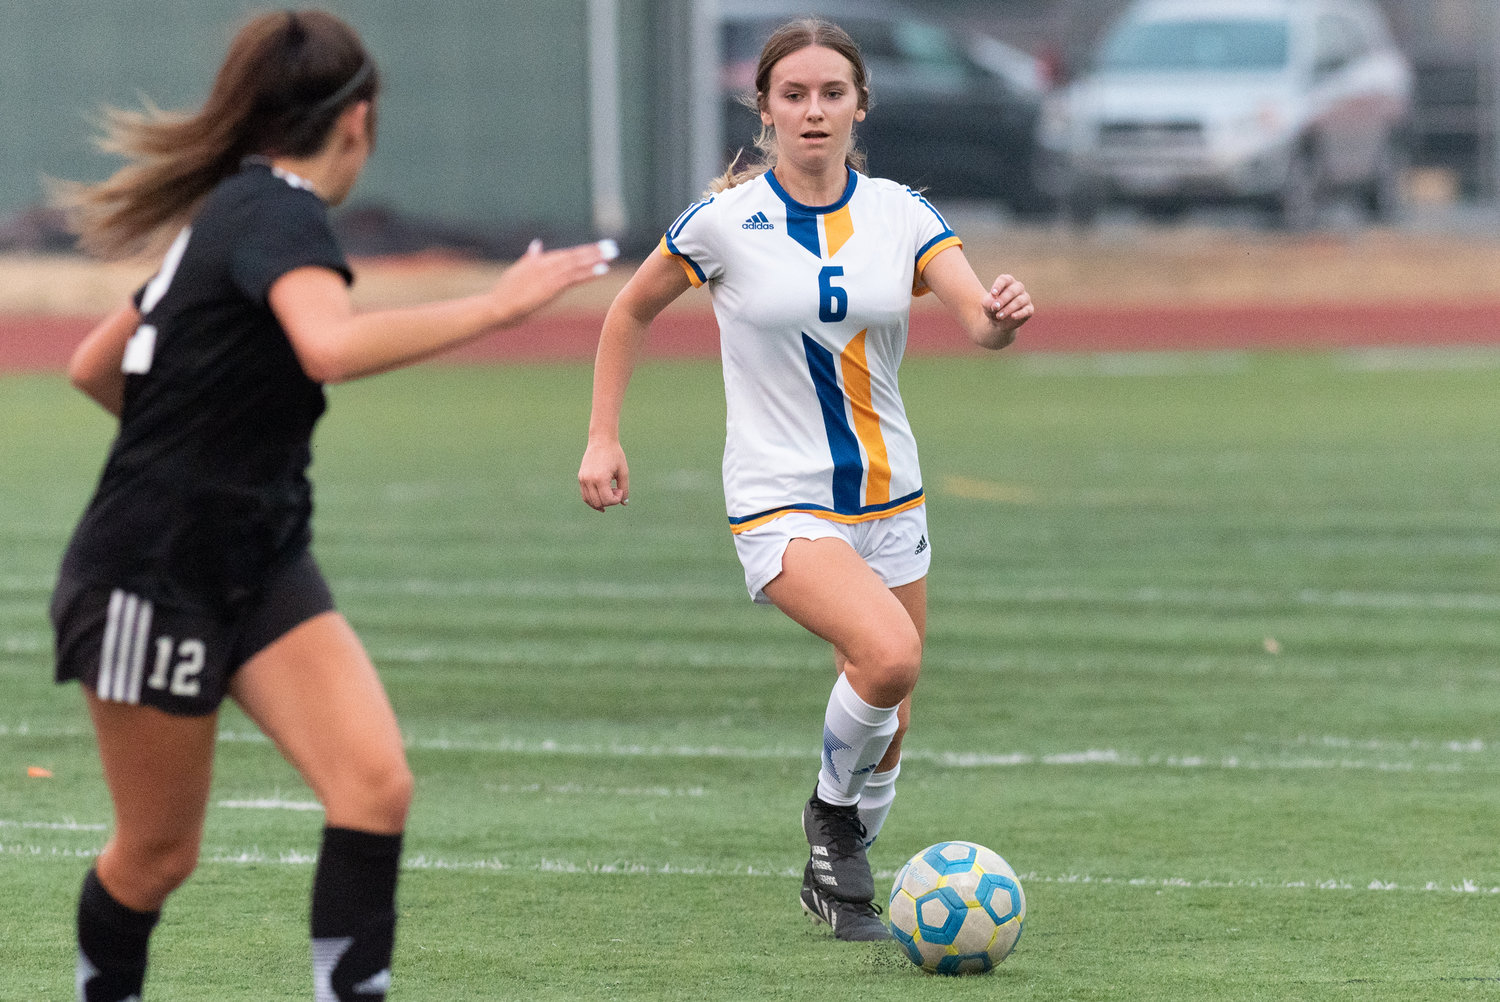 Centralia College midfielder Grace Vestal dribbles with the ball during a match against Tacoma on Sept. 10, at Tiger Stadium.